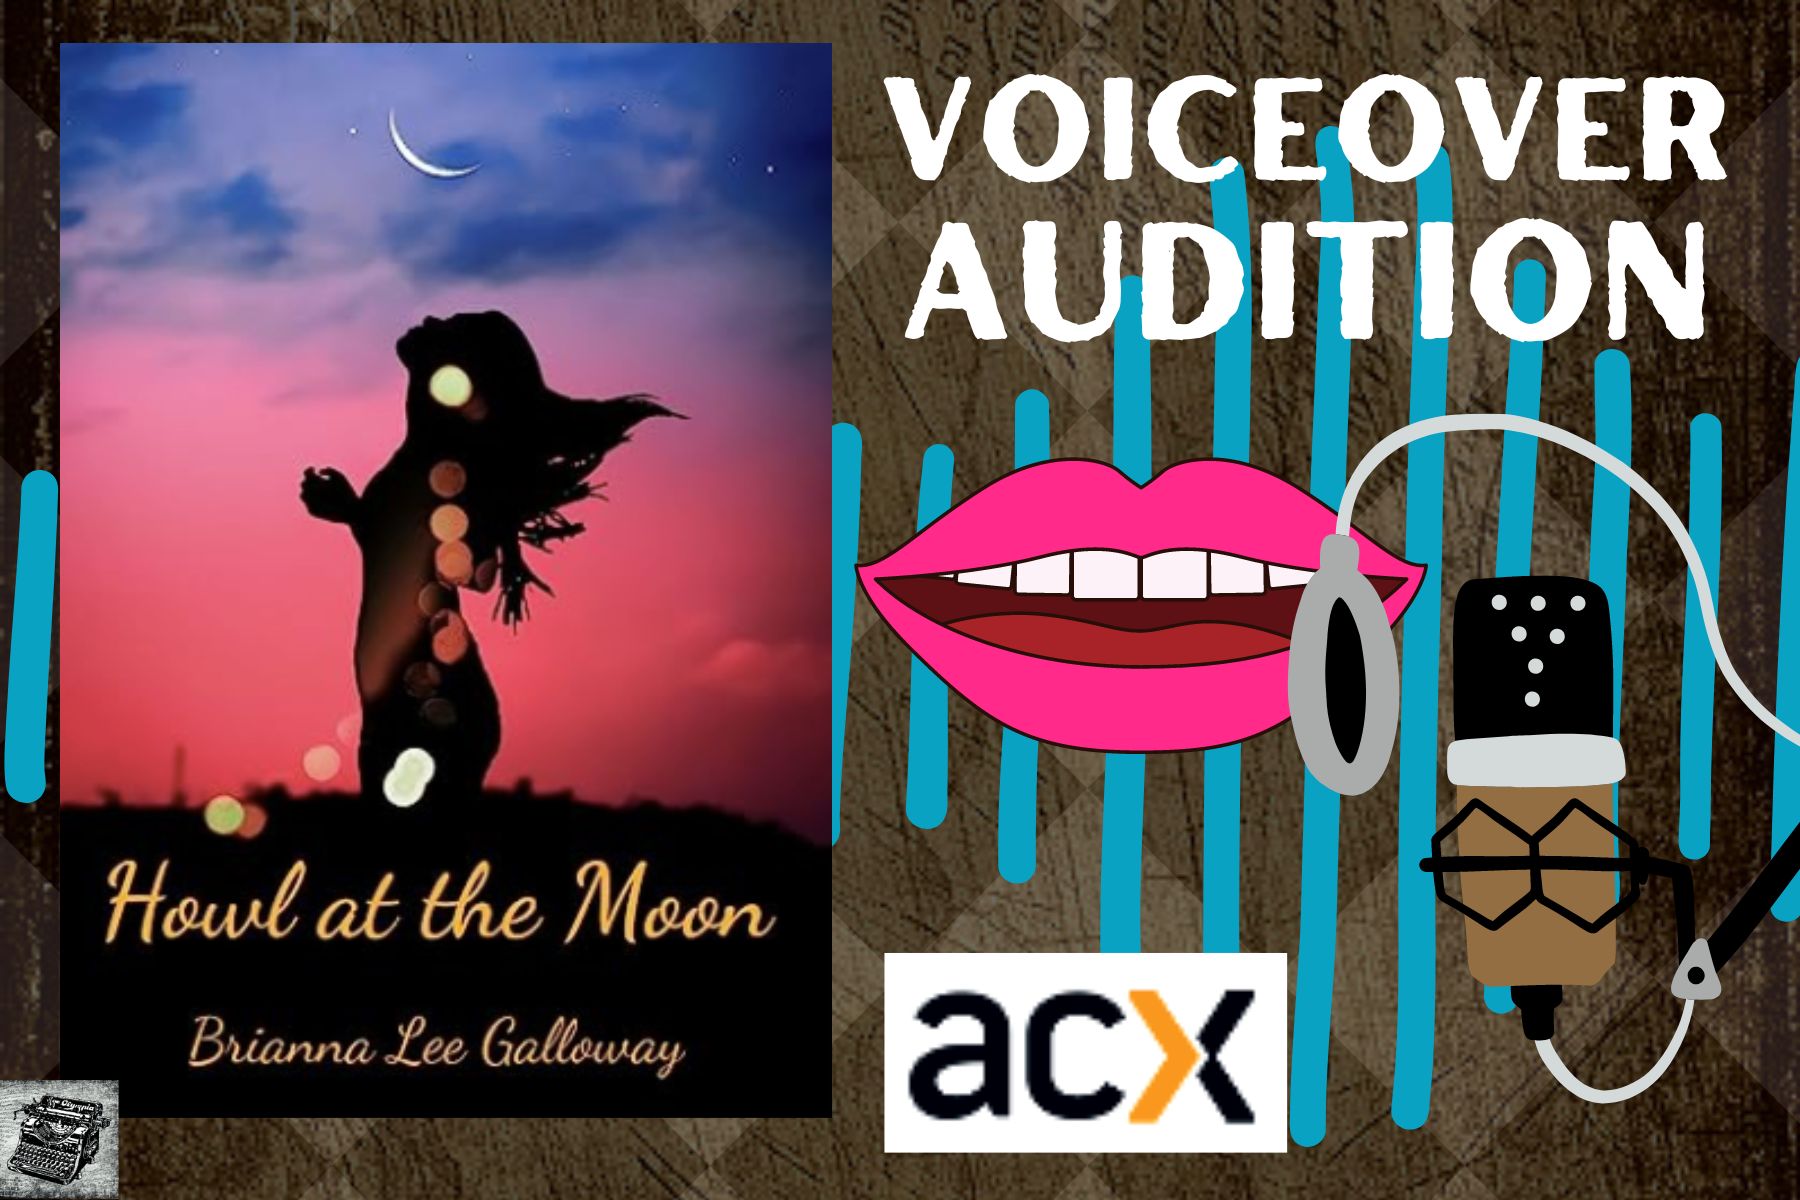 howl at the moon, audition transcript, audio audition, acx audition